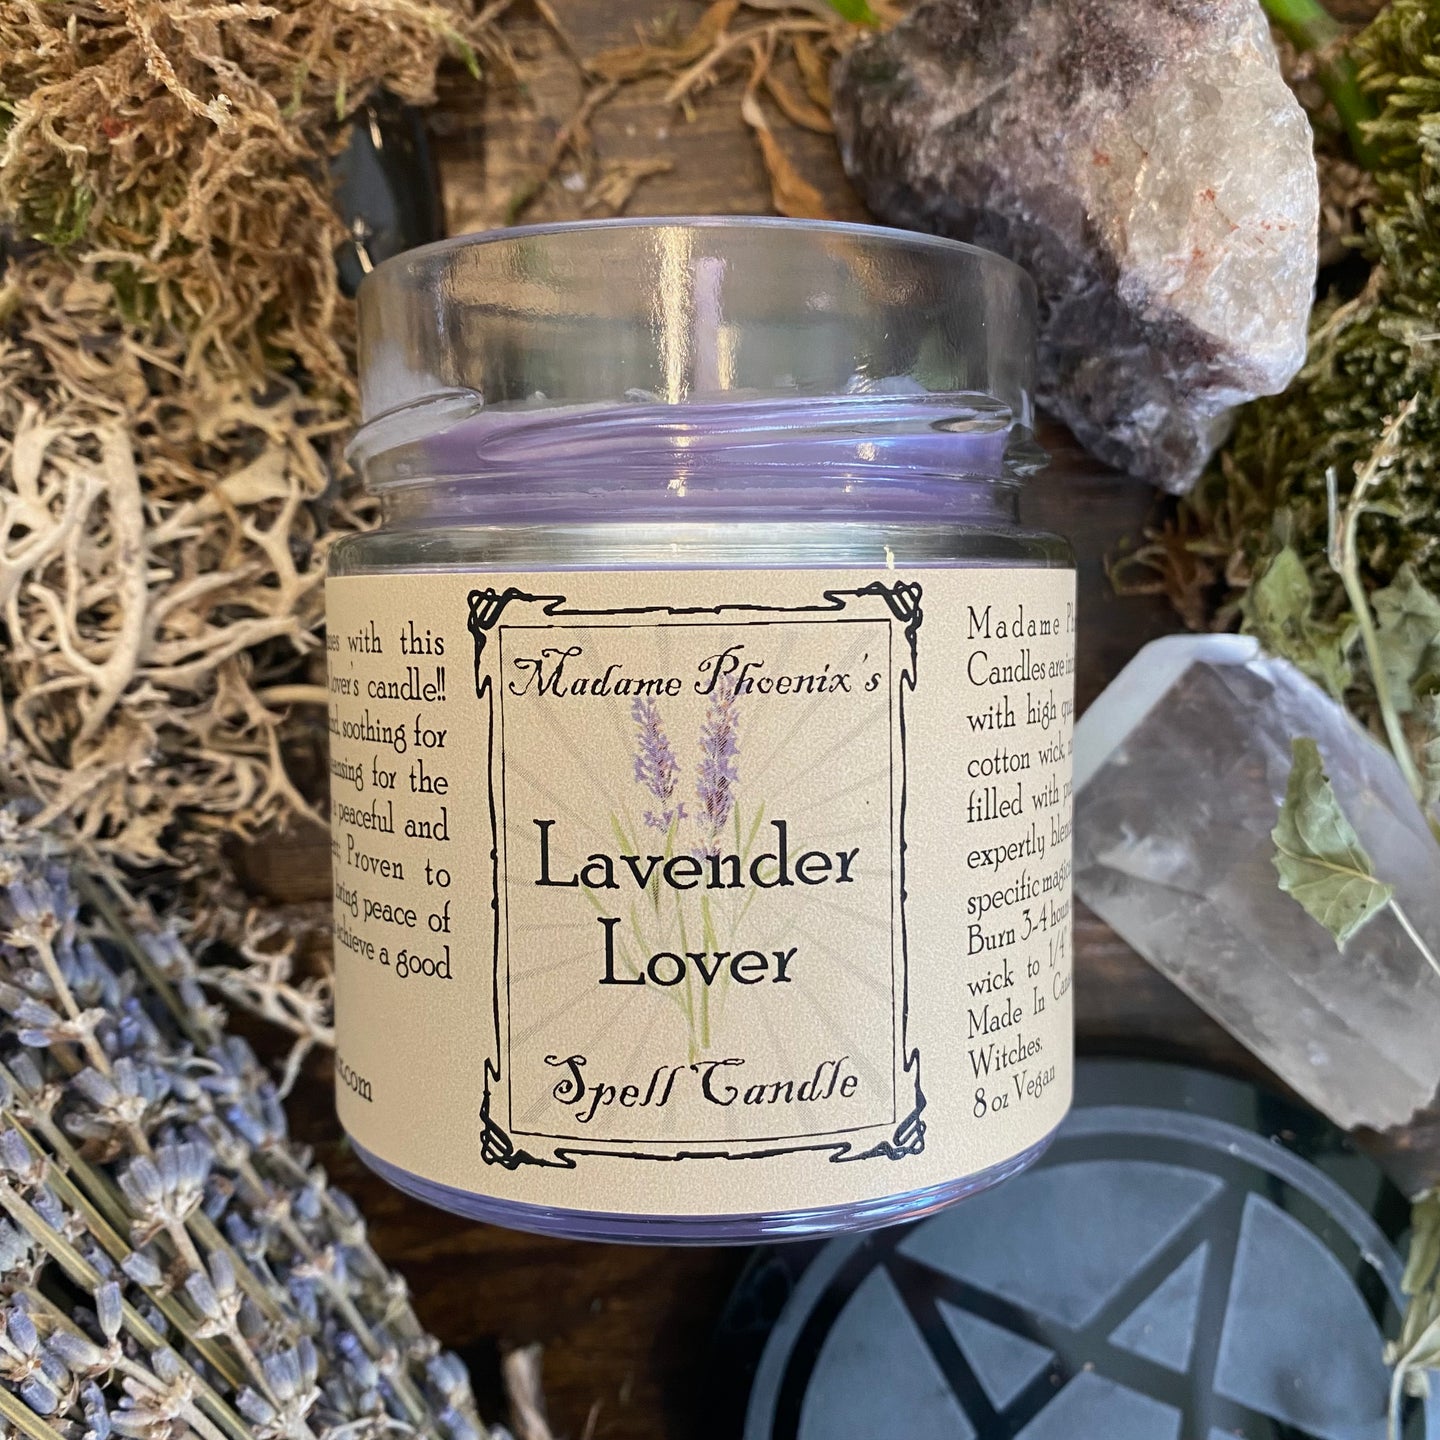 Lavender Lover Magic Aromatherapy Spell Candle